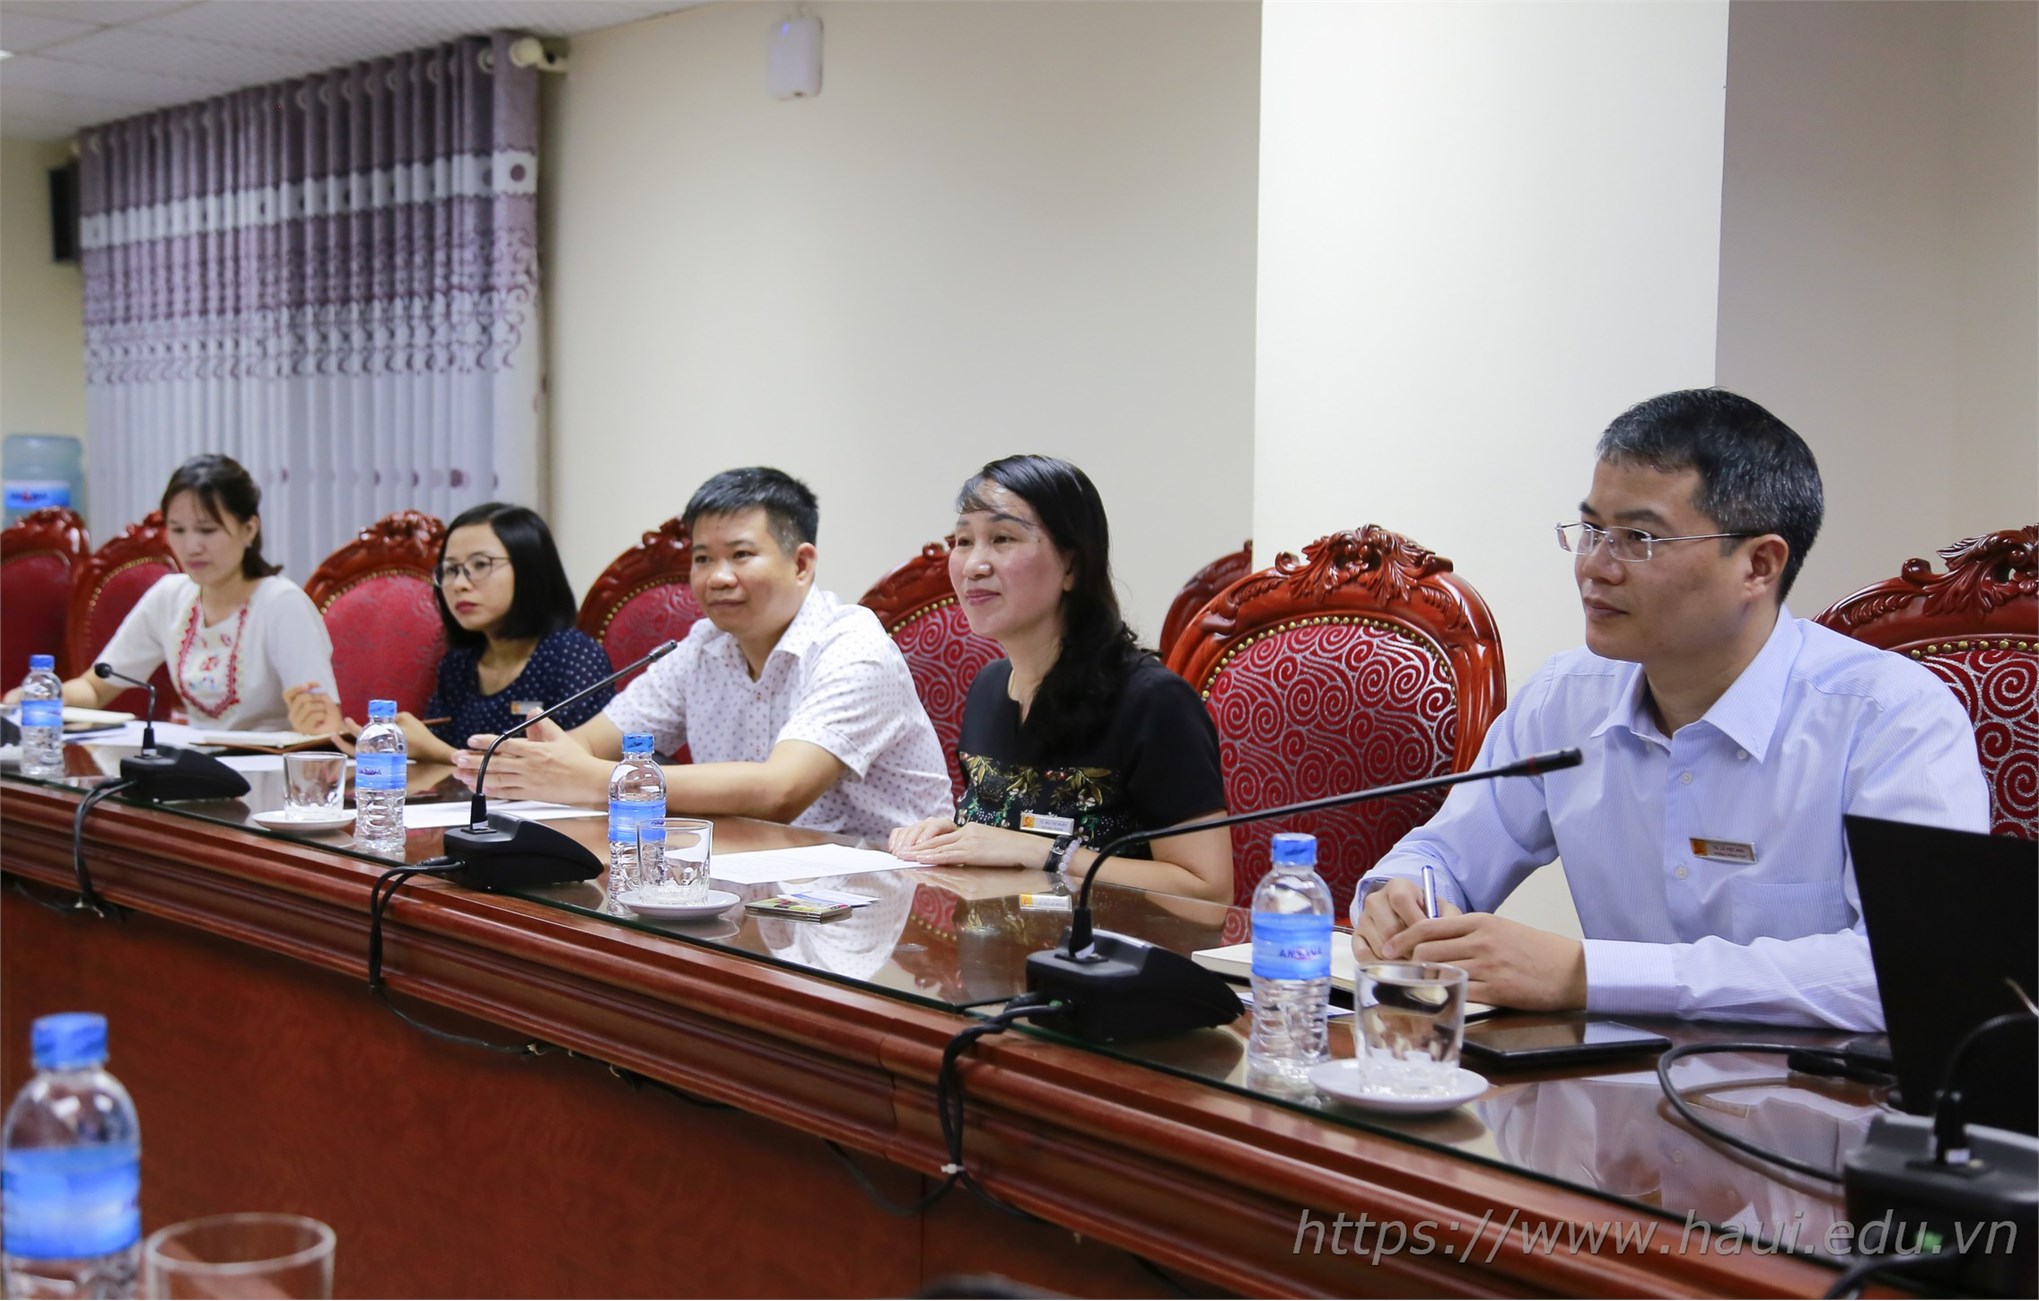 Guangxi University of Science and Technology, China paid a working visit to Hanoi University of Industry